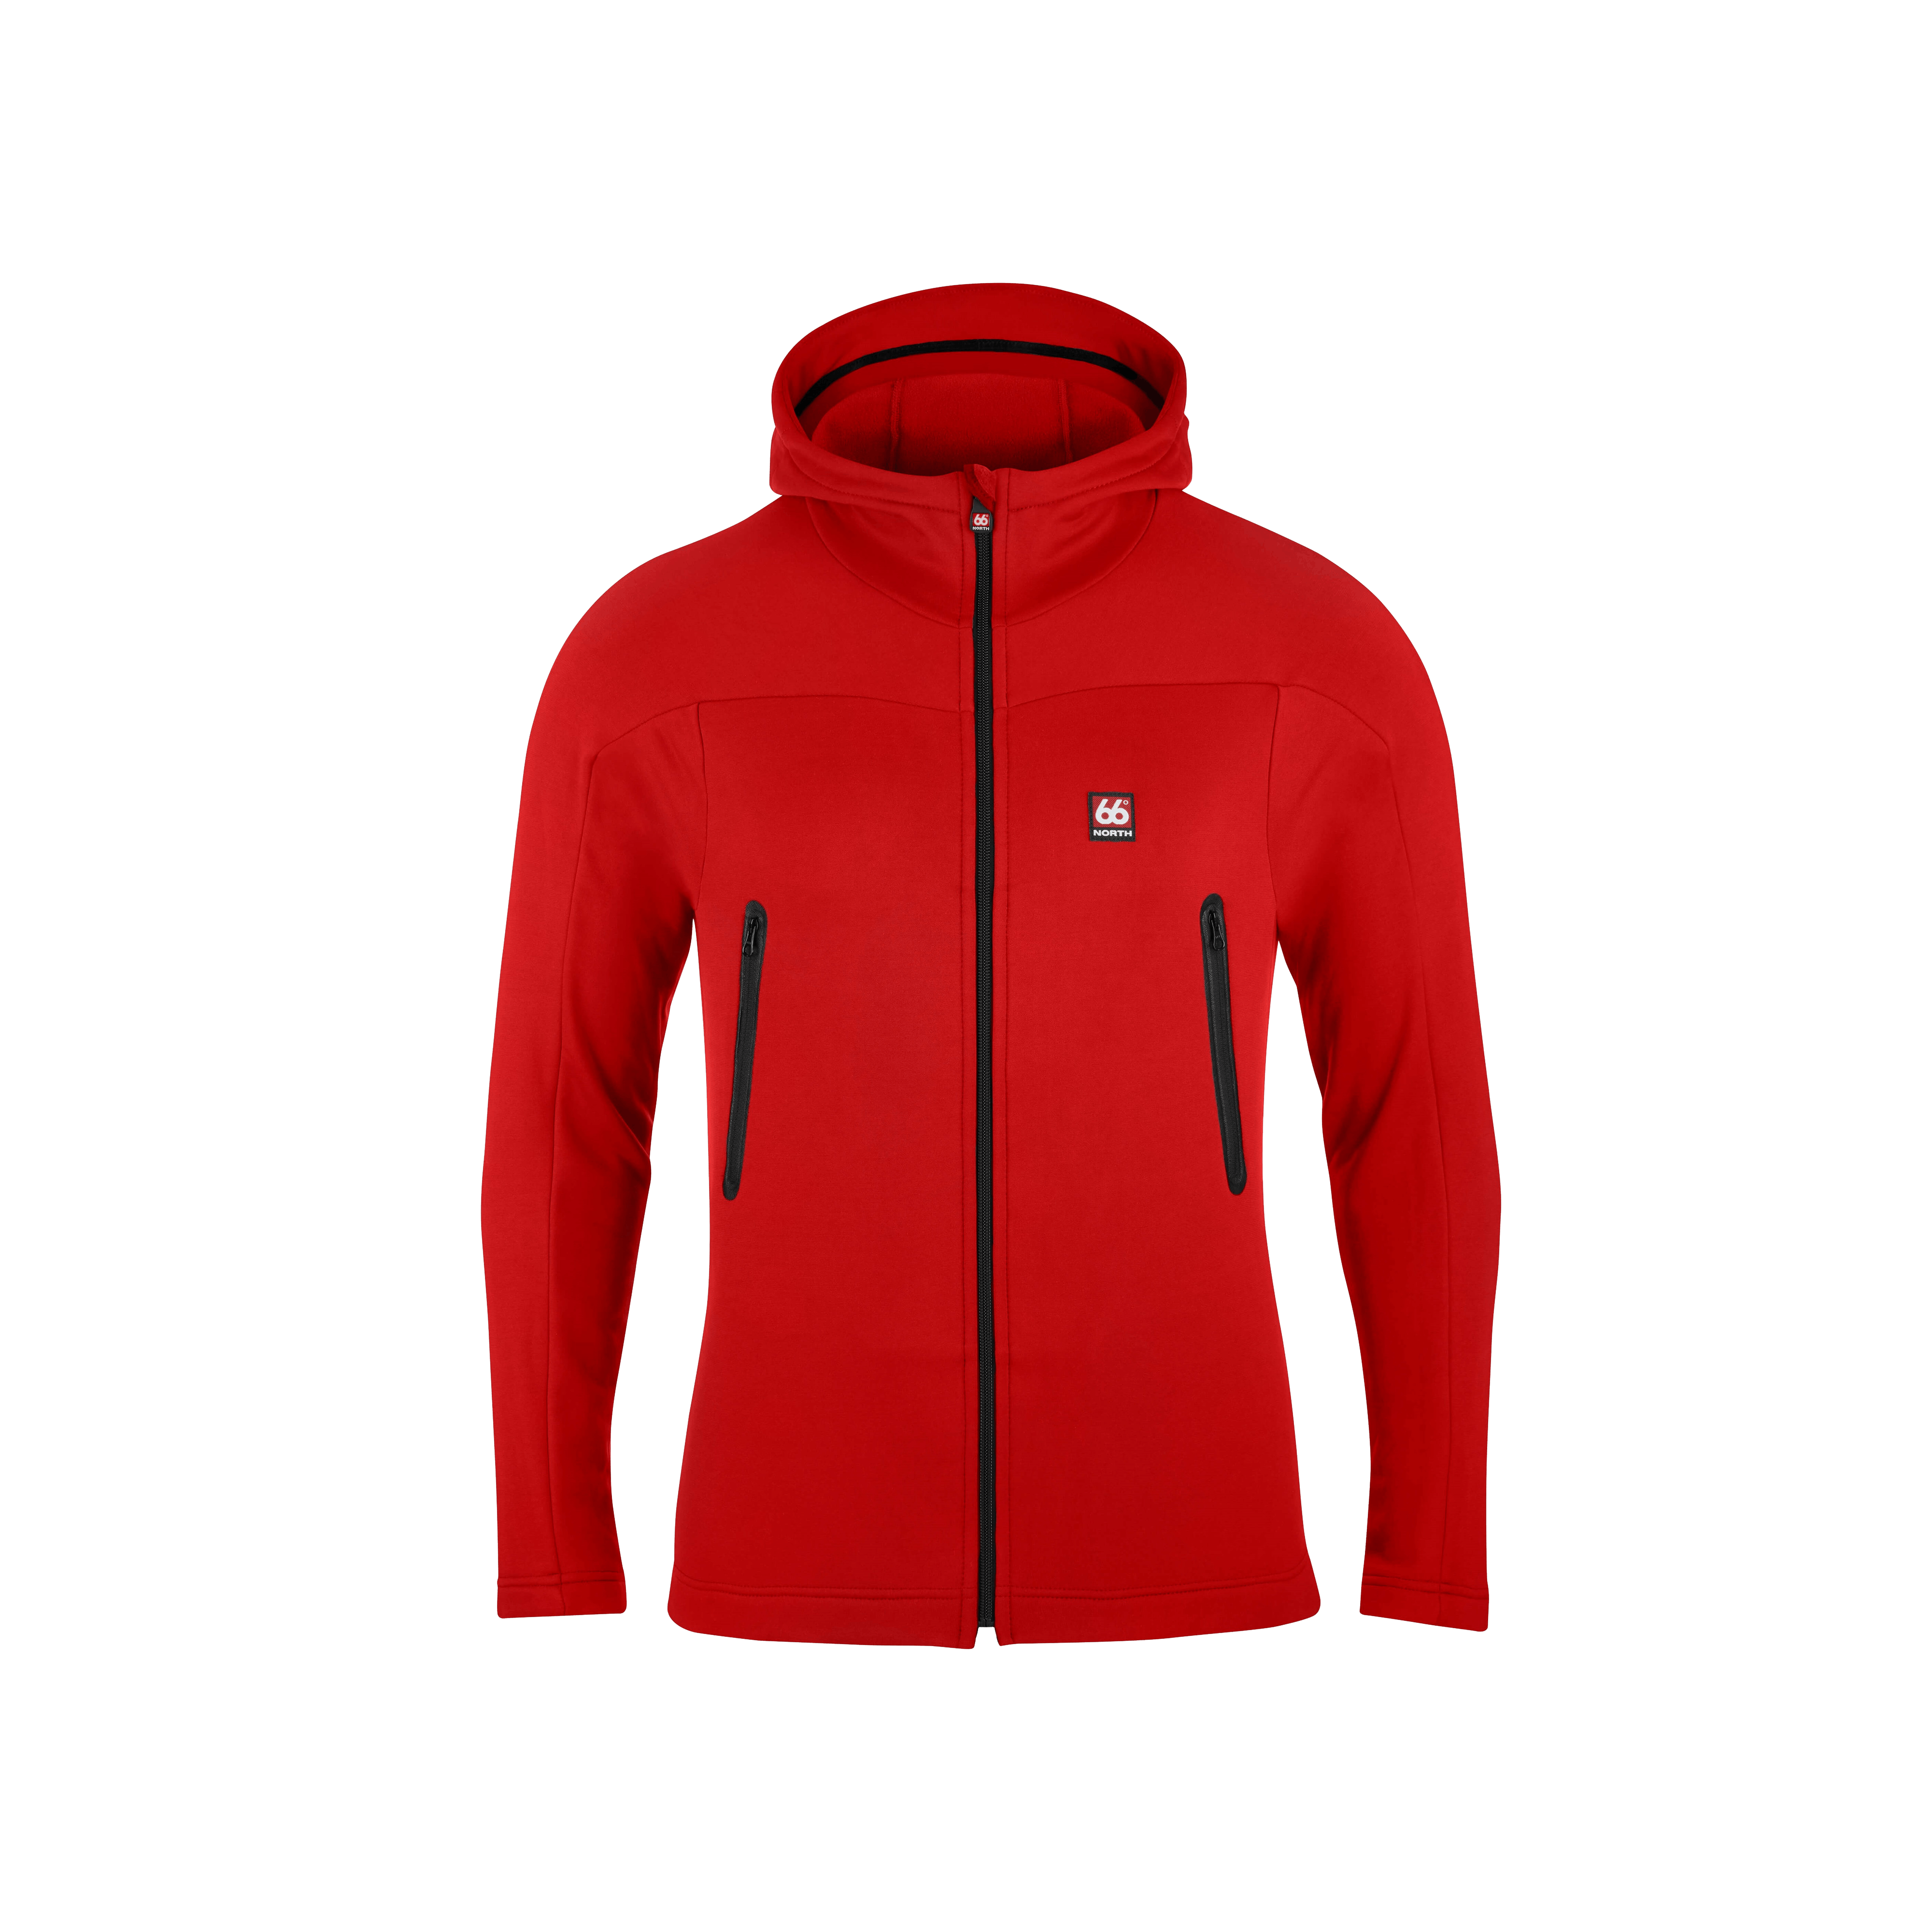 66 North Mens Snfell TopsandVests - Red - L